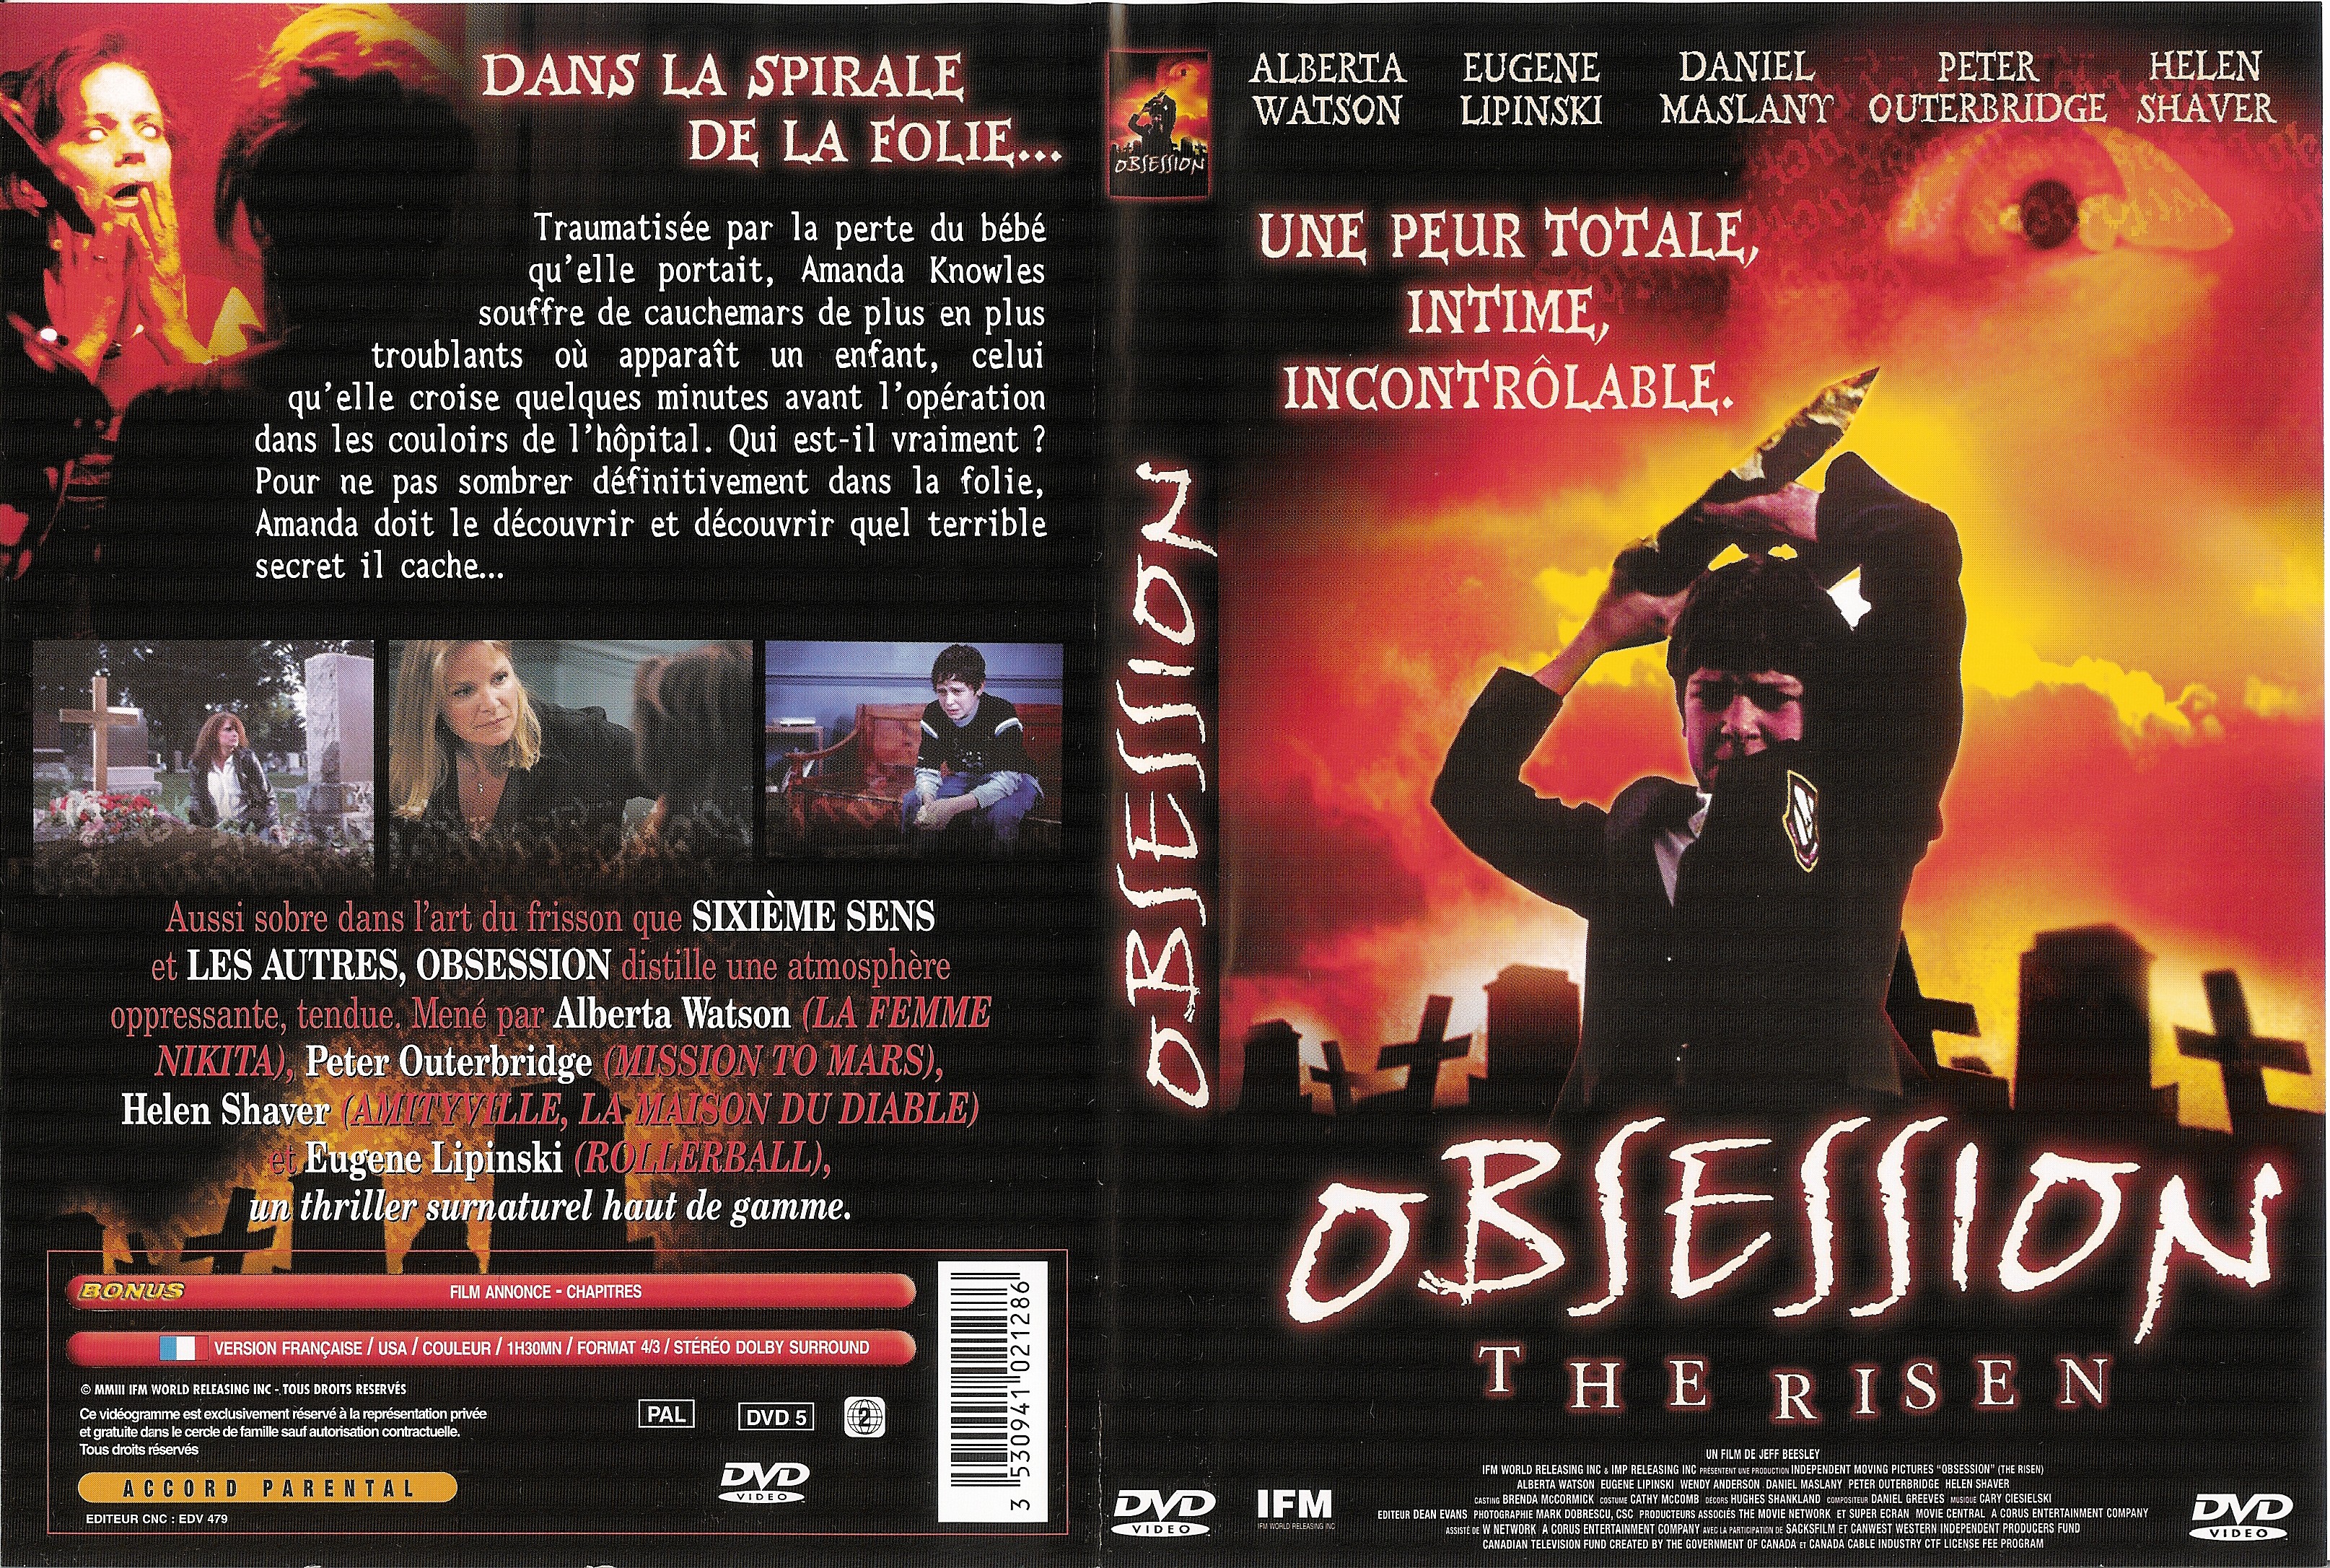 Jaquette DVD Obsession the risen